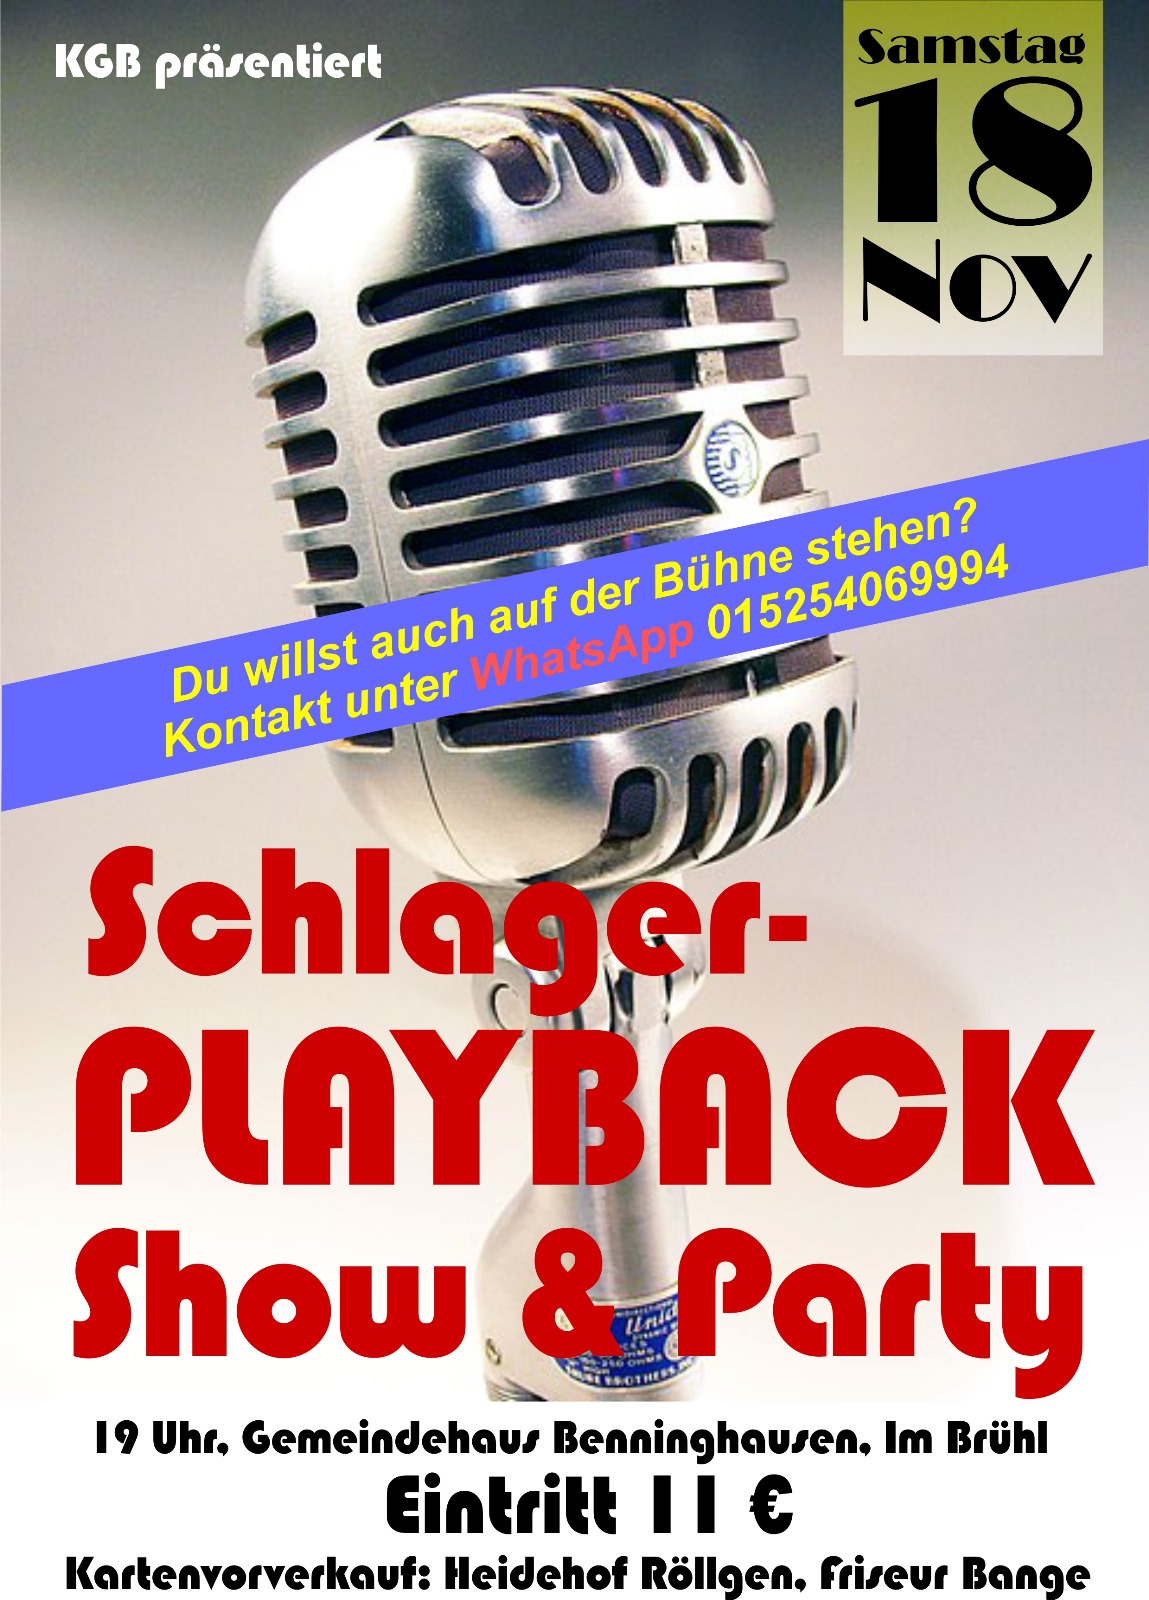 Schlager Playback Show & Party